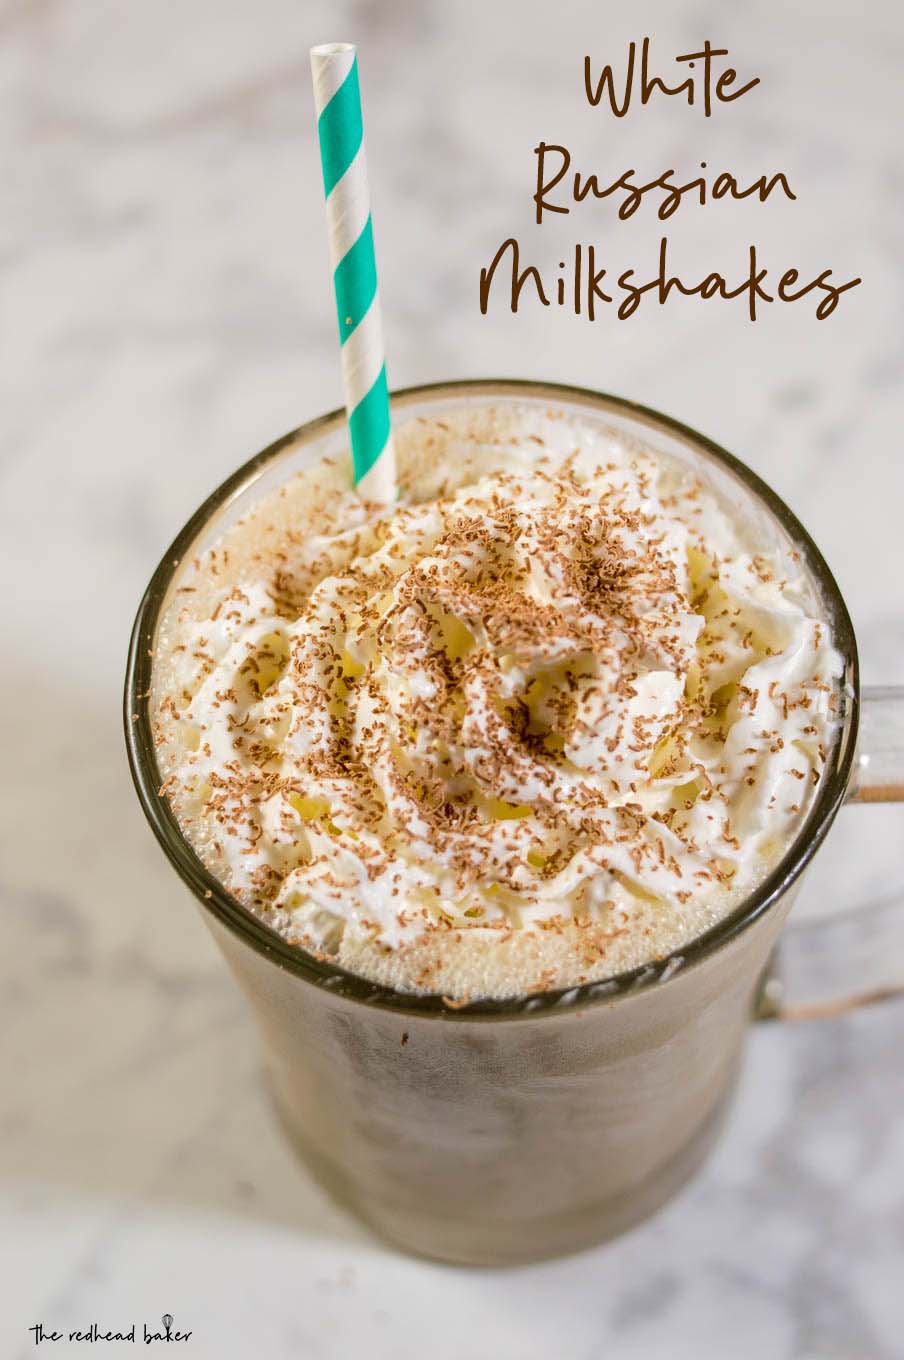 White Russian milkshakes are a twist on the creamy cocktail: coffee ice cream, milk, whipped cream vodka and coffee liqueur blend together in a frozen twist on the classic drink!